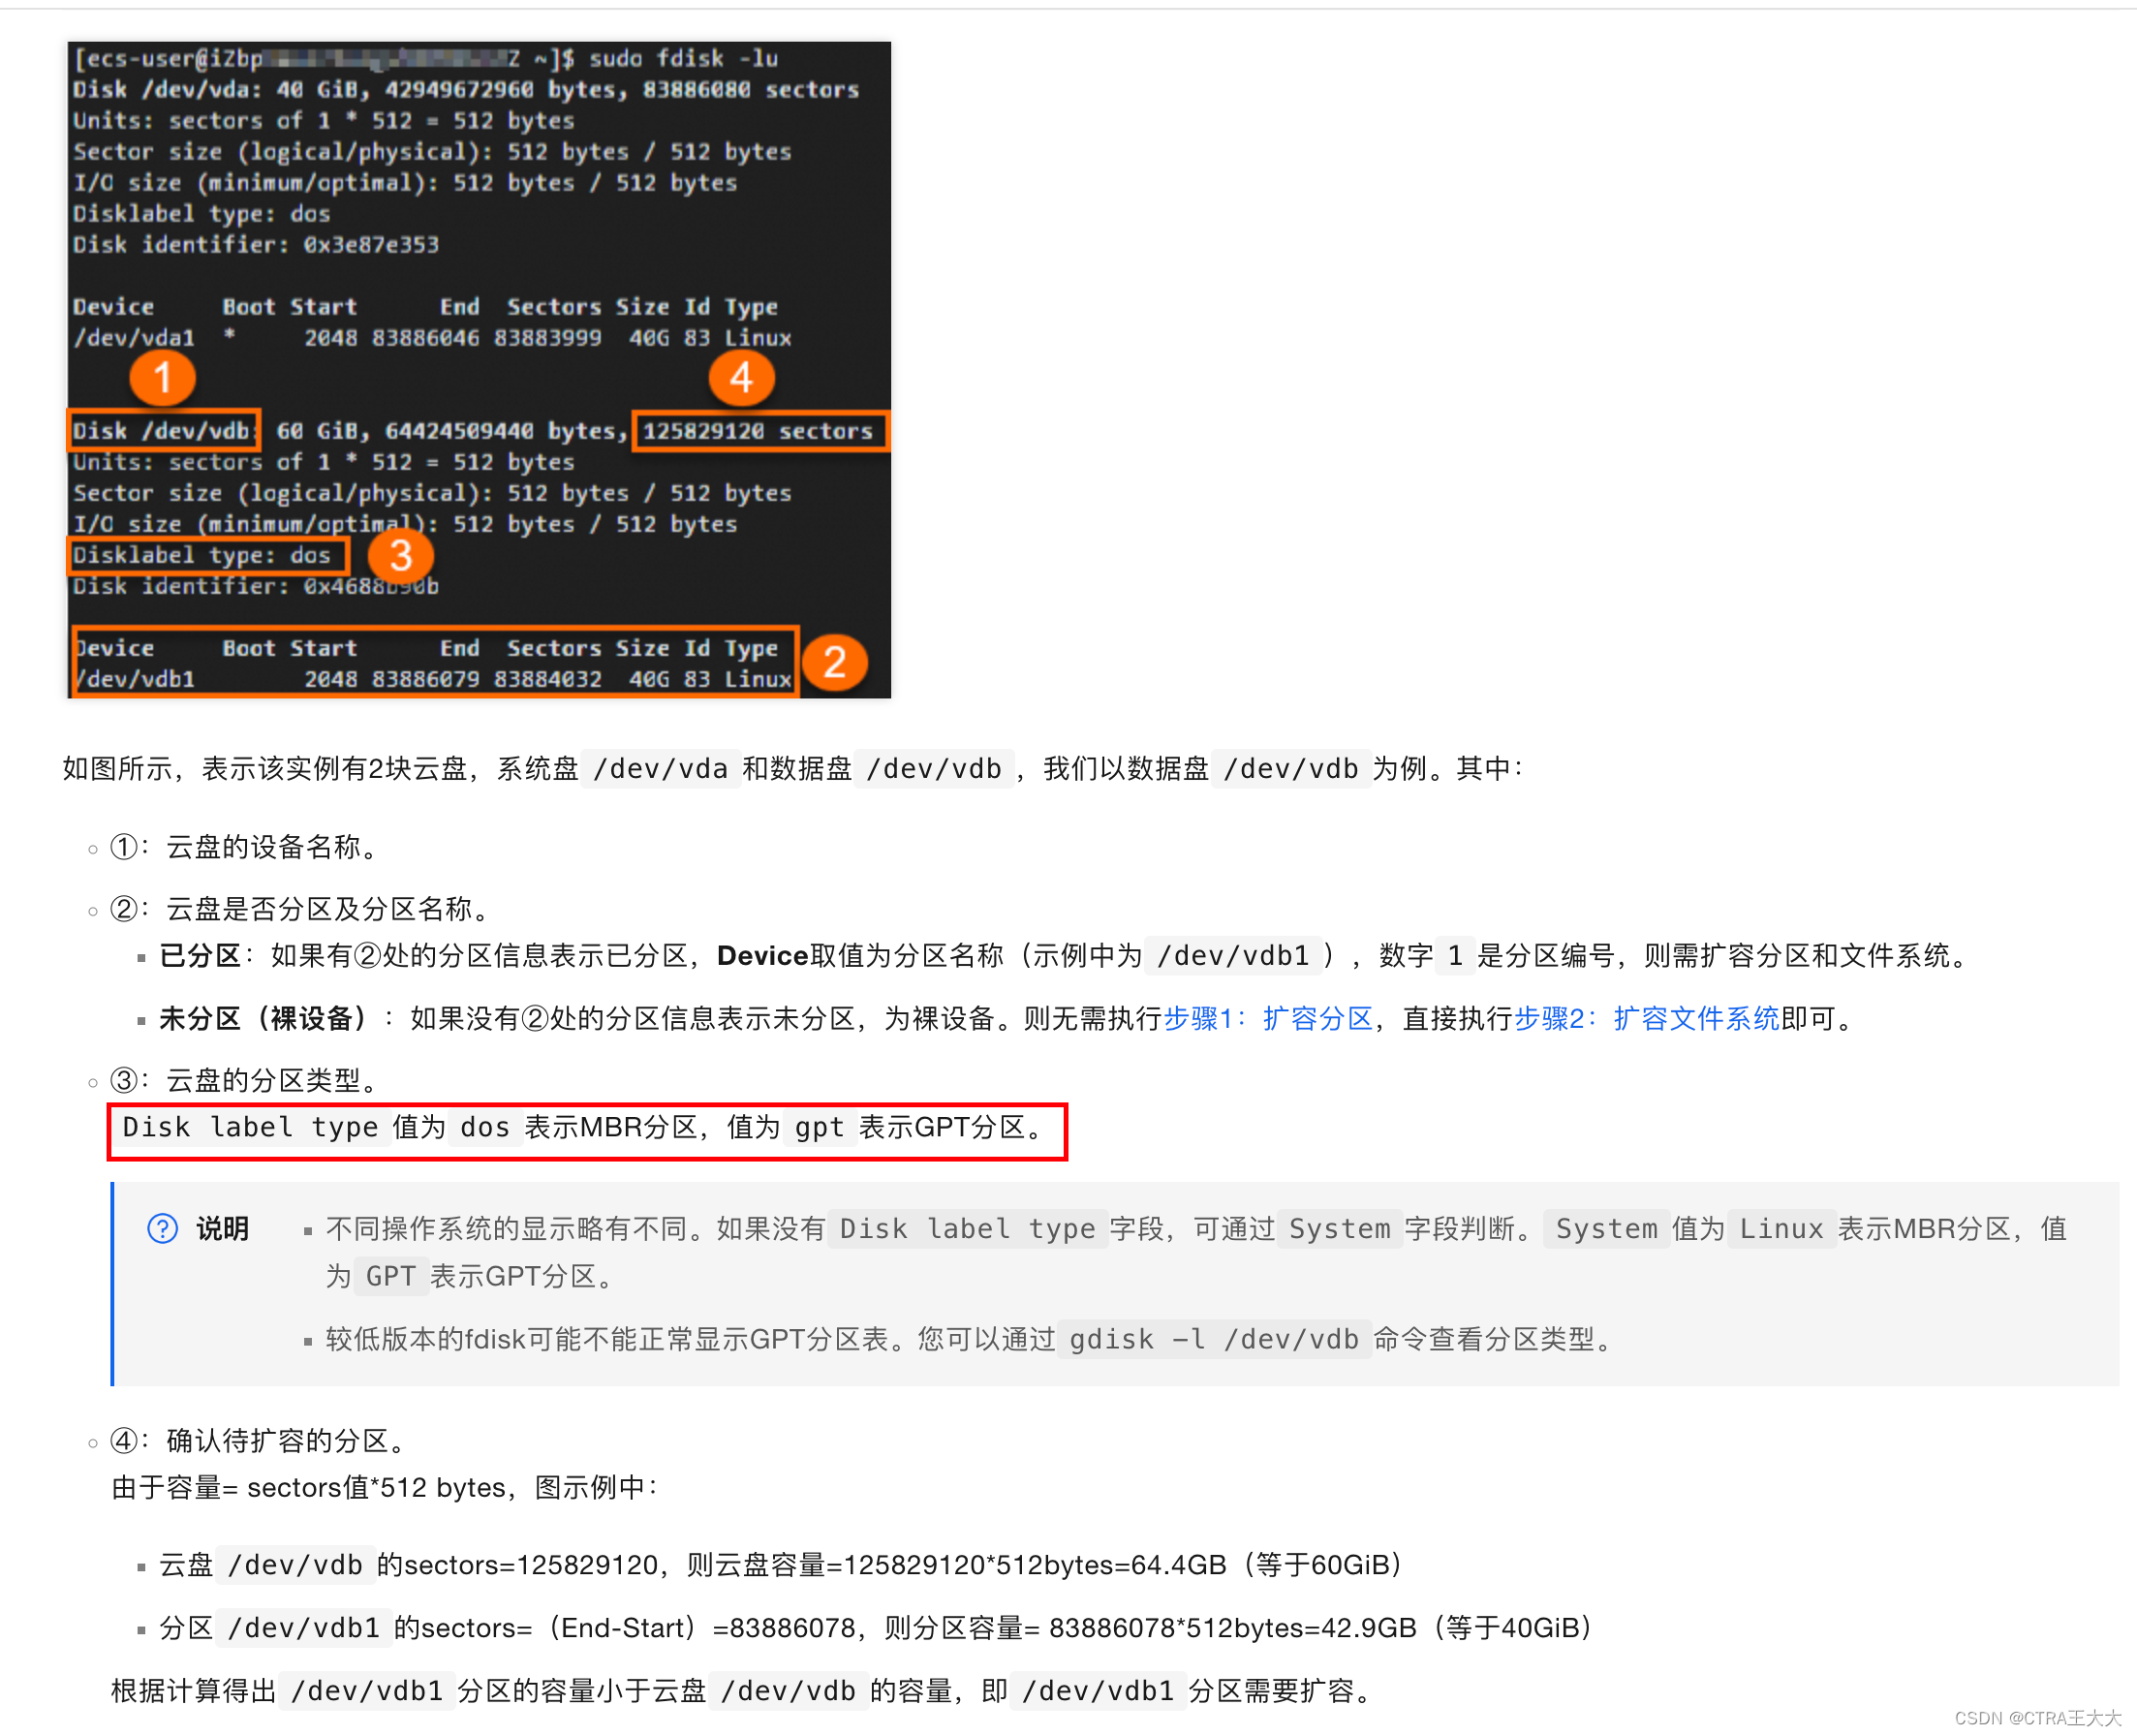 【devops】 阿里<span style='color:red;'>云</span>挂载<span style='color:red;'>云</span><span style='color:red;'>盘</span> | 扩展系统<span style='color:red;'>硬盘</span> | 不重启服务器增加<span style='color:red;'>硬盘</span>容量